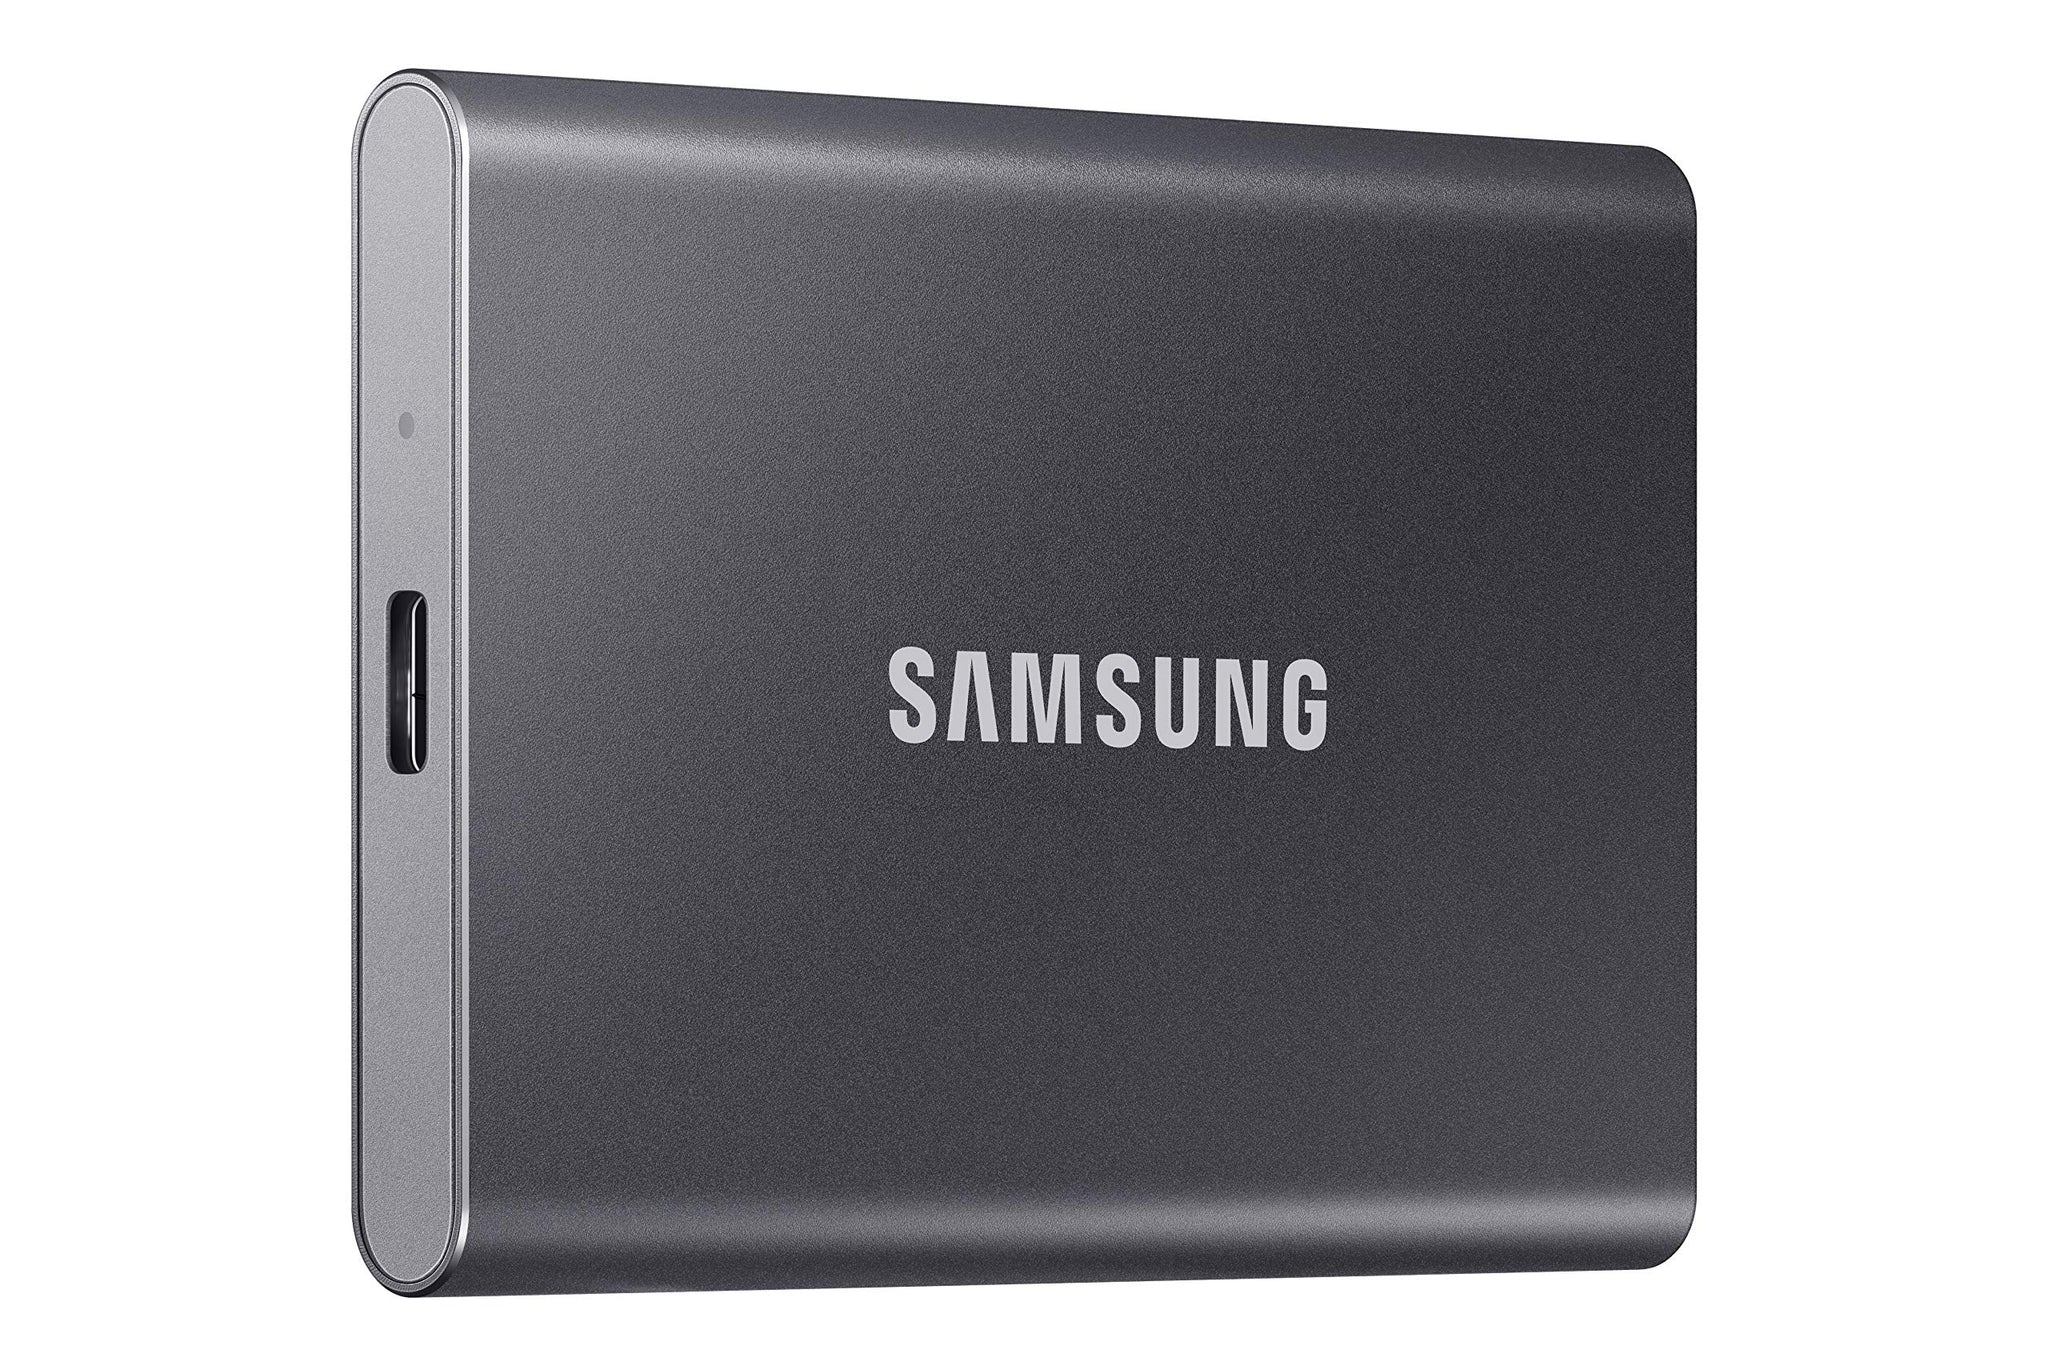 SAMSUNG T7 2TB - Portable SSD - External Solid State Drive